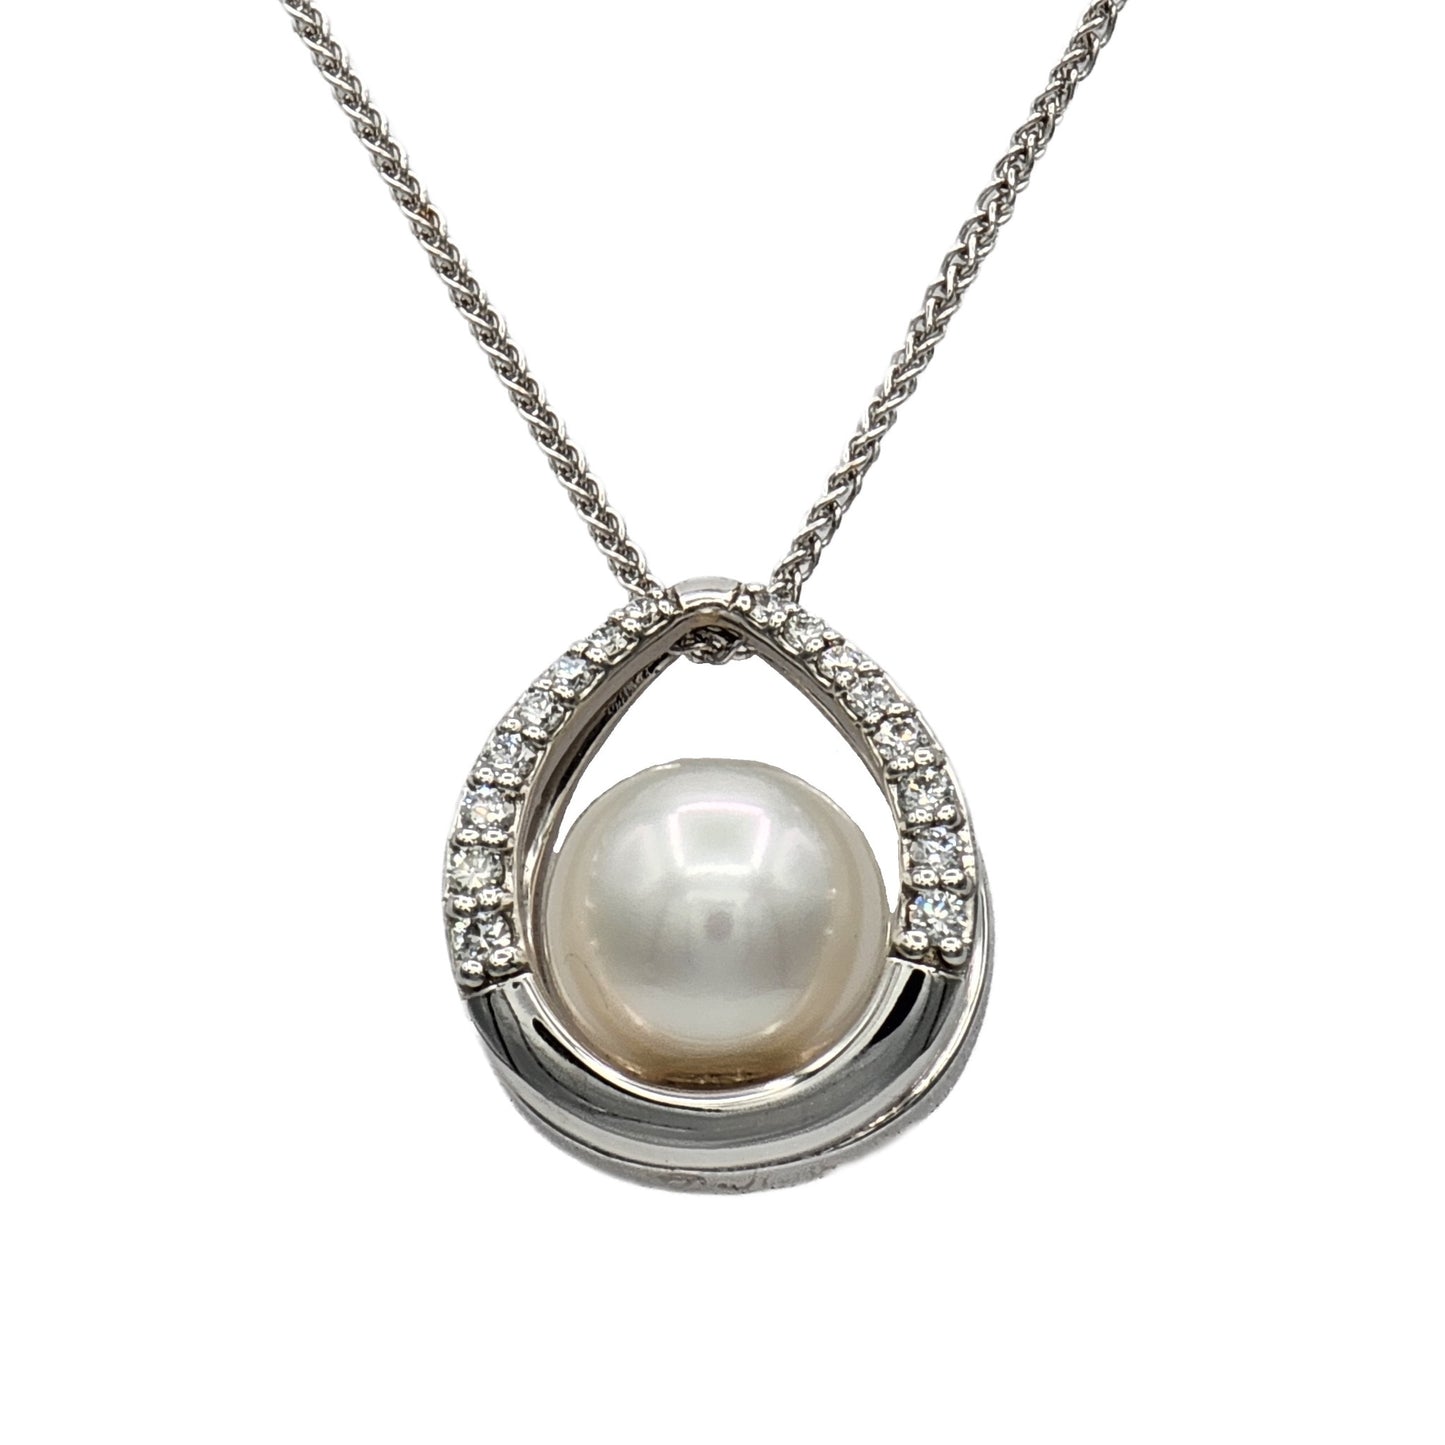 9.5MM Japanese Akoya Pearl and 16=0.18Ctw Round Diamond Pendant in 14K White Gold